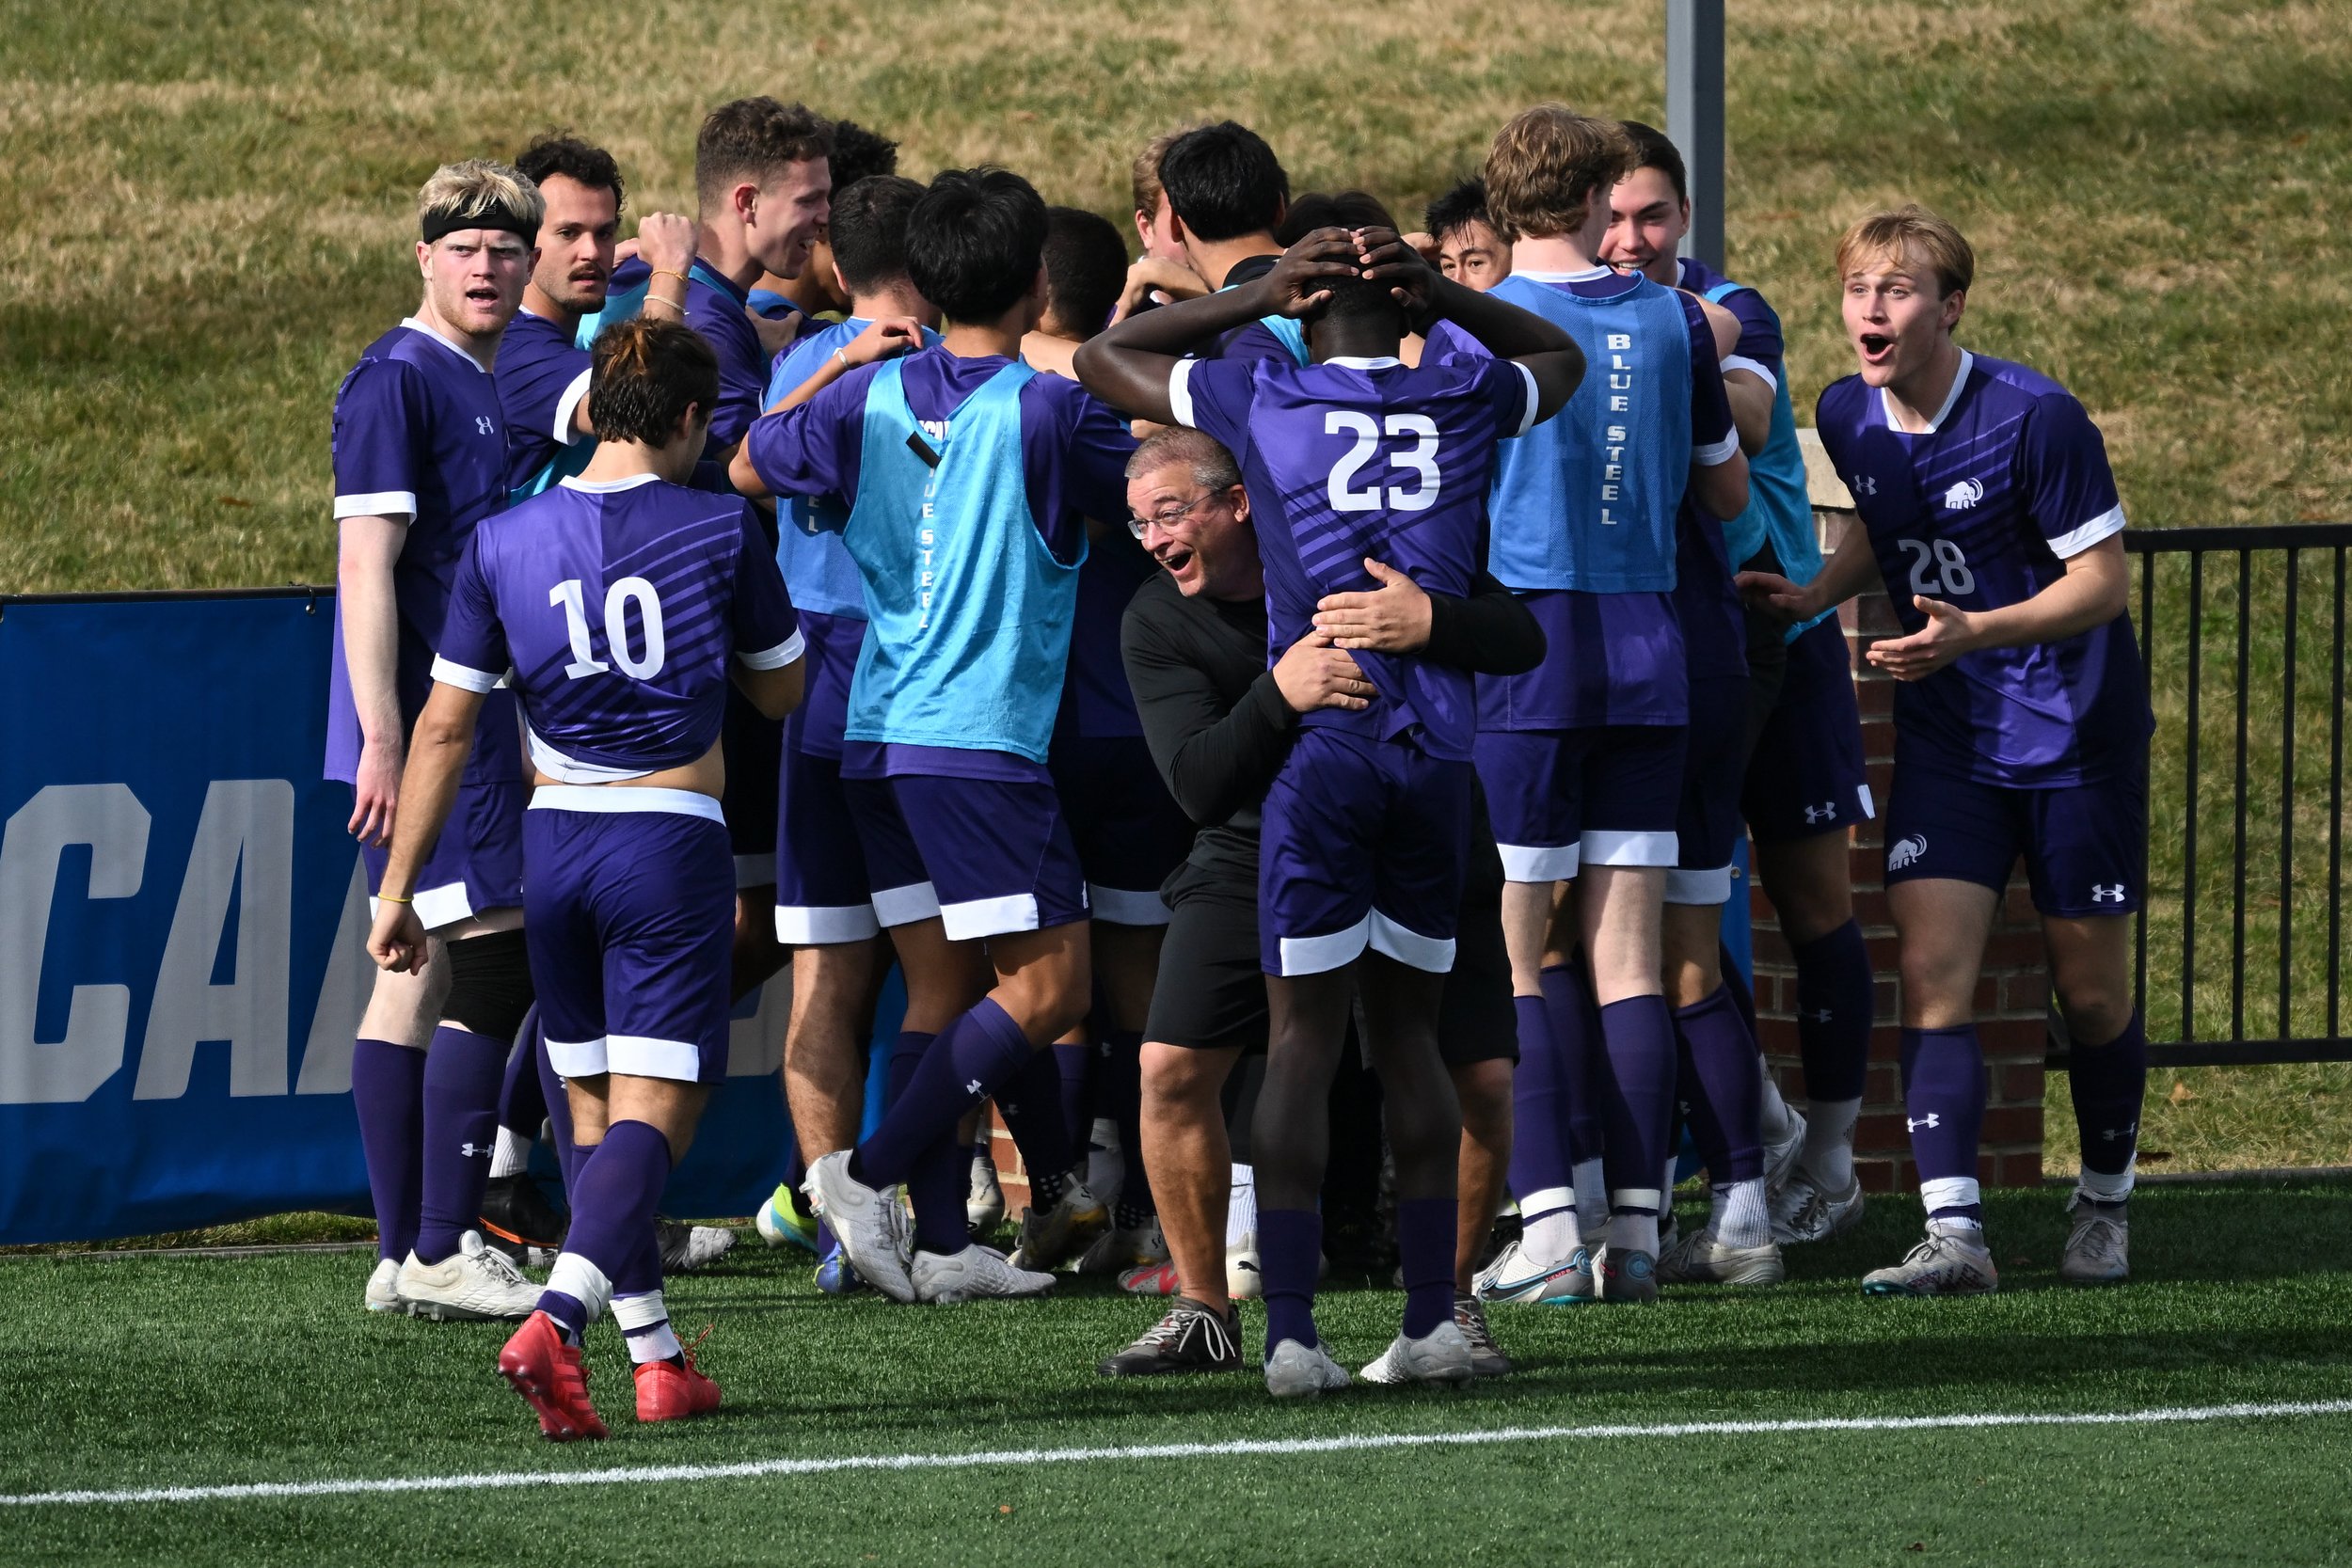  SALEM, VIRGINIA - DECEMBER 03: The Amherst Mammoths celebrate after forward Luka Ohadike #27 of the Amherst Mammoths scores against the St. Olaf Oles during the 2023 Division III Men's Soccer Championship at Donald J. Kerr Stadium on December 03, 20